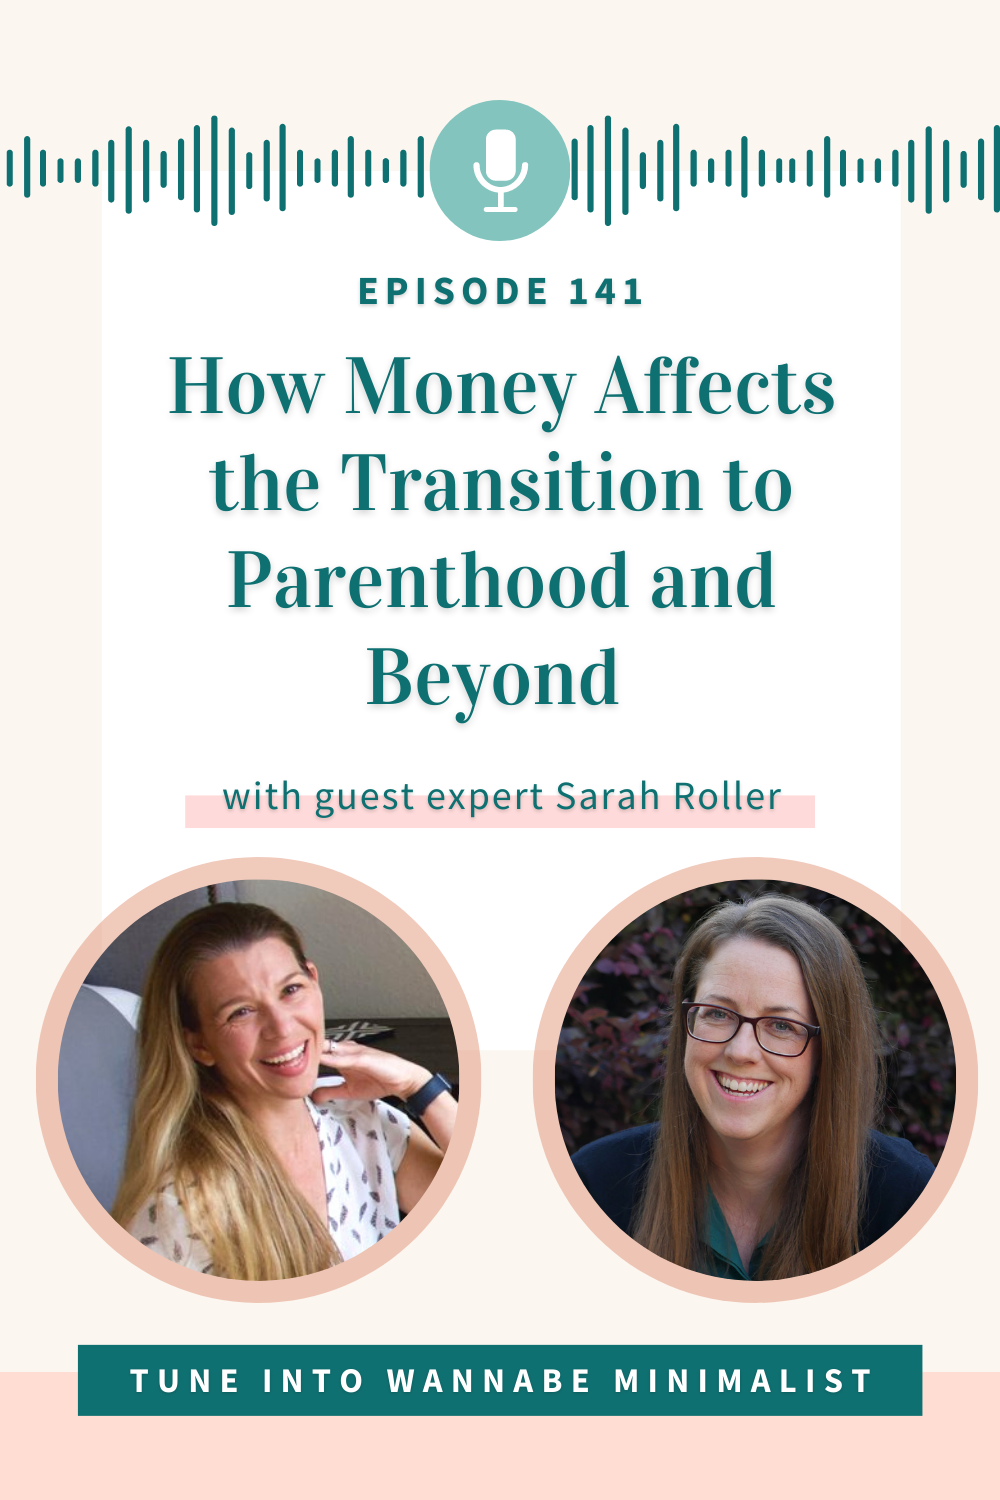 How Money Affects the Transition to Parenthood and Beyond